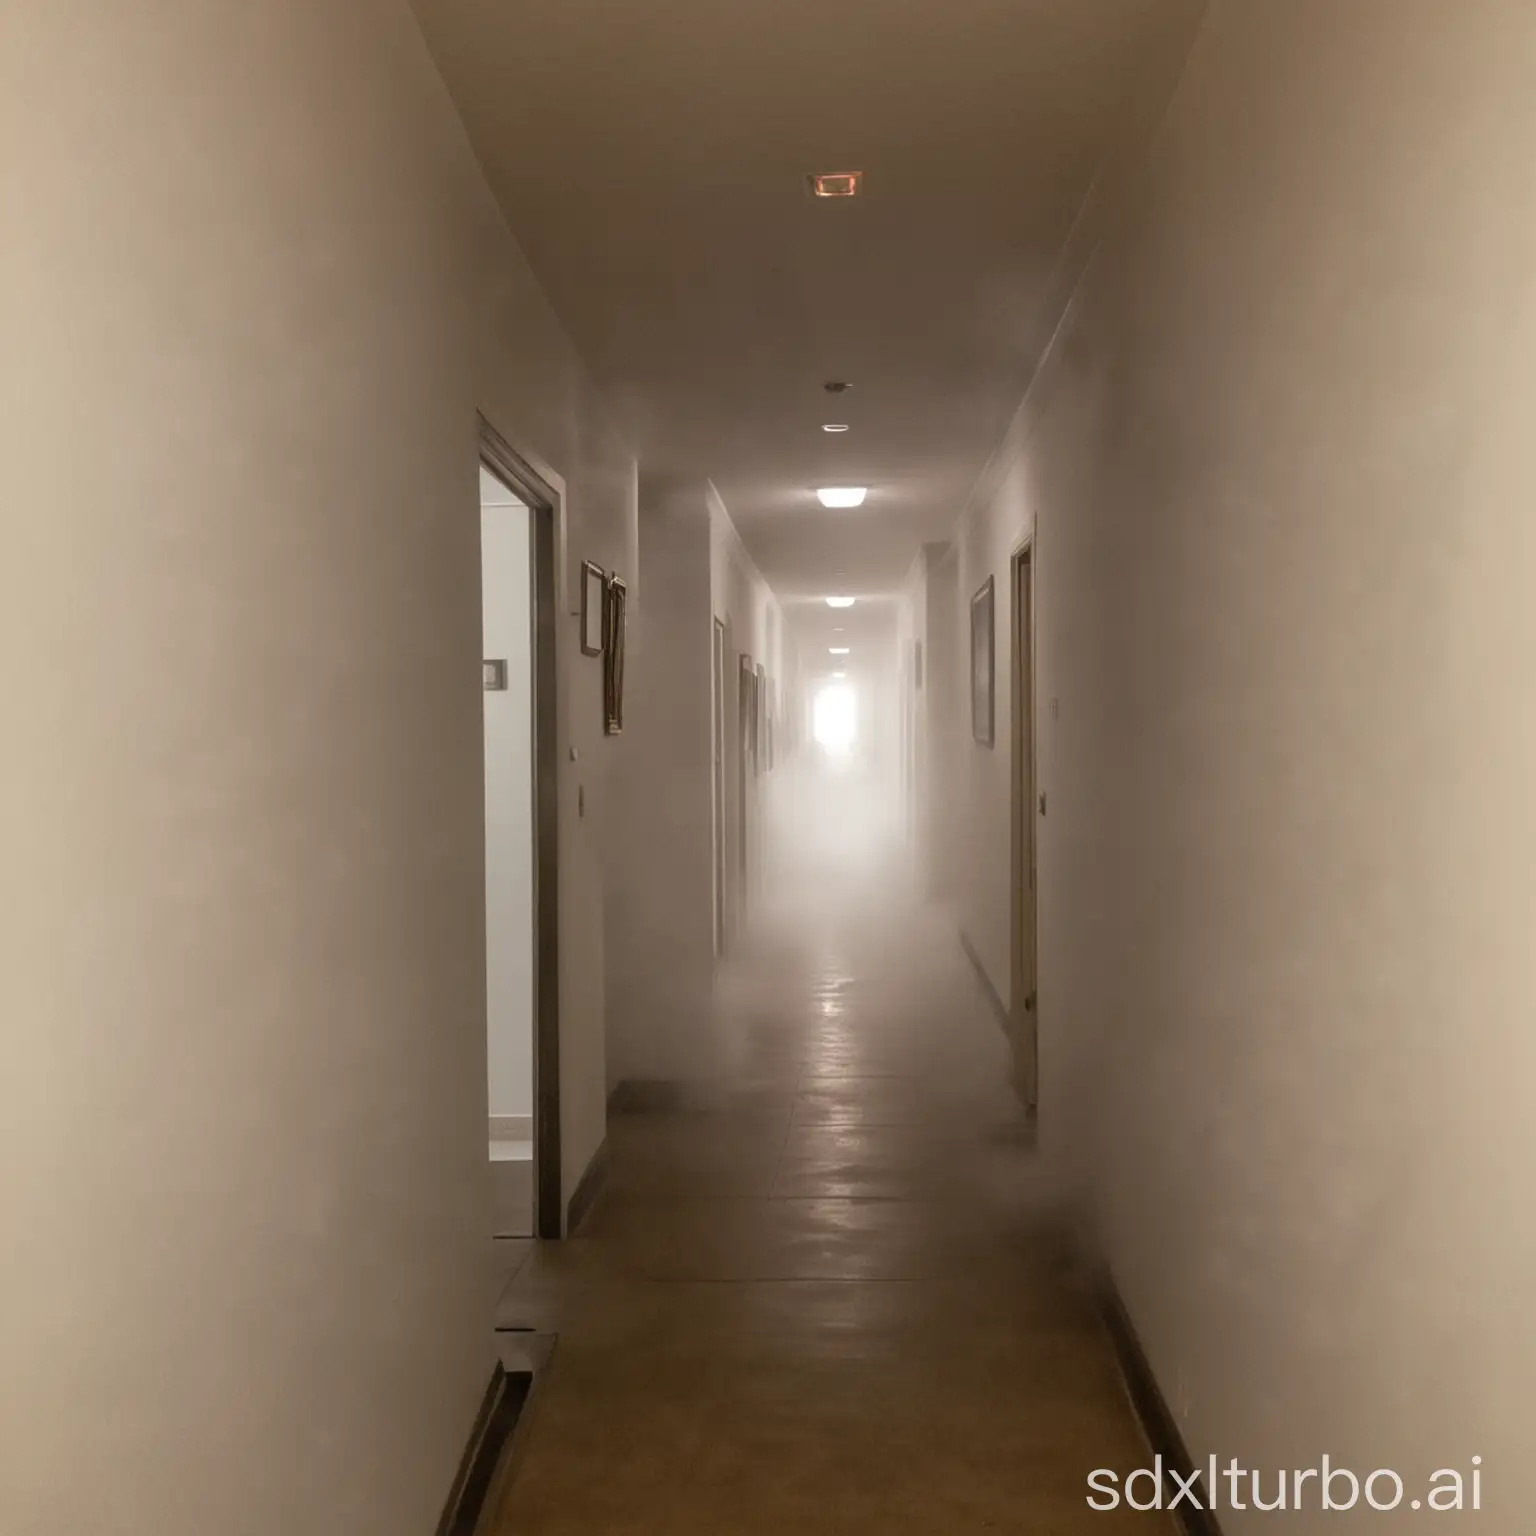 hallway completely filled with smoke from bottom to top